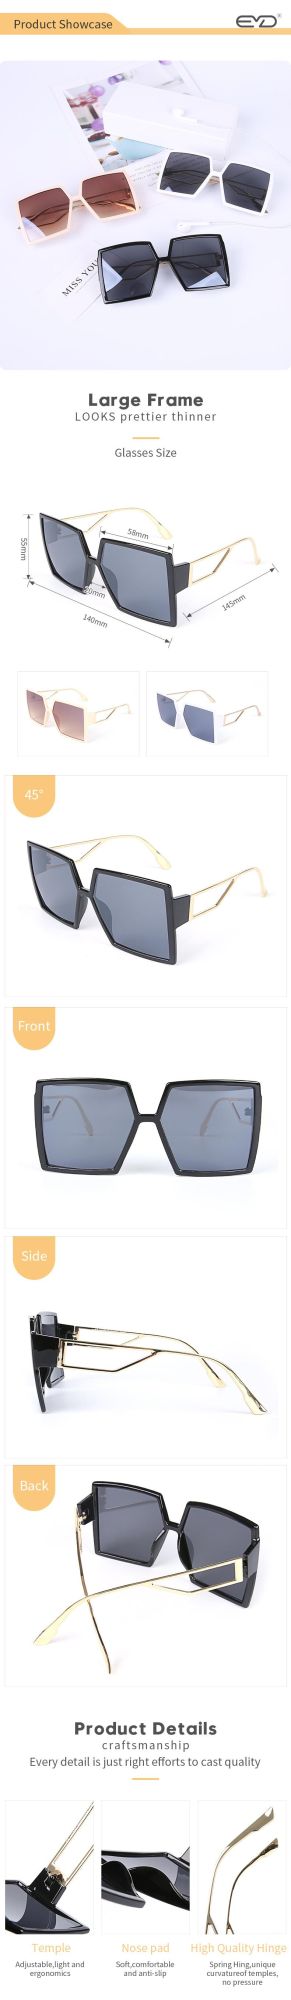 for Big Face Sunglasses with Metal Temple Unisex Style Square Shape Sunglass Fashion Street Eyewear